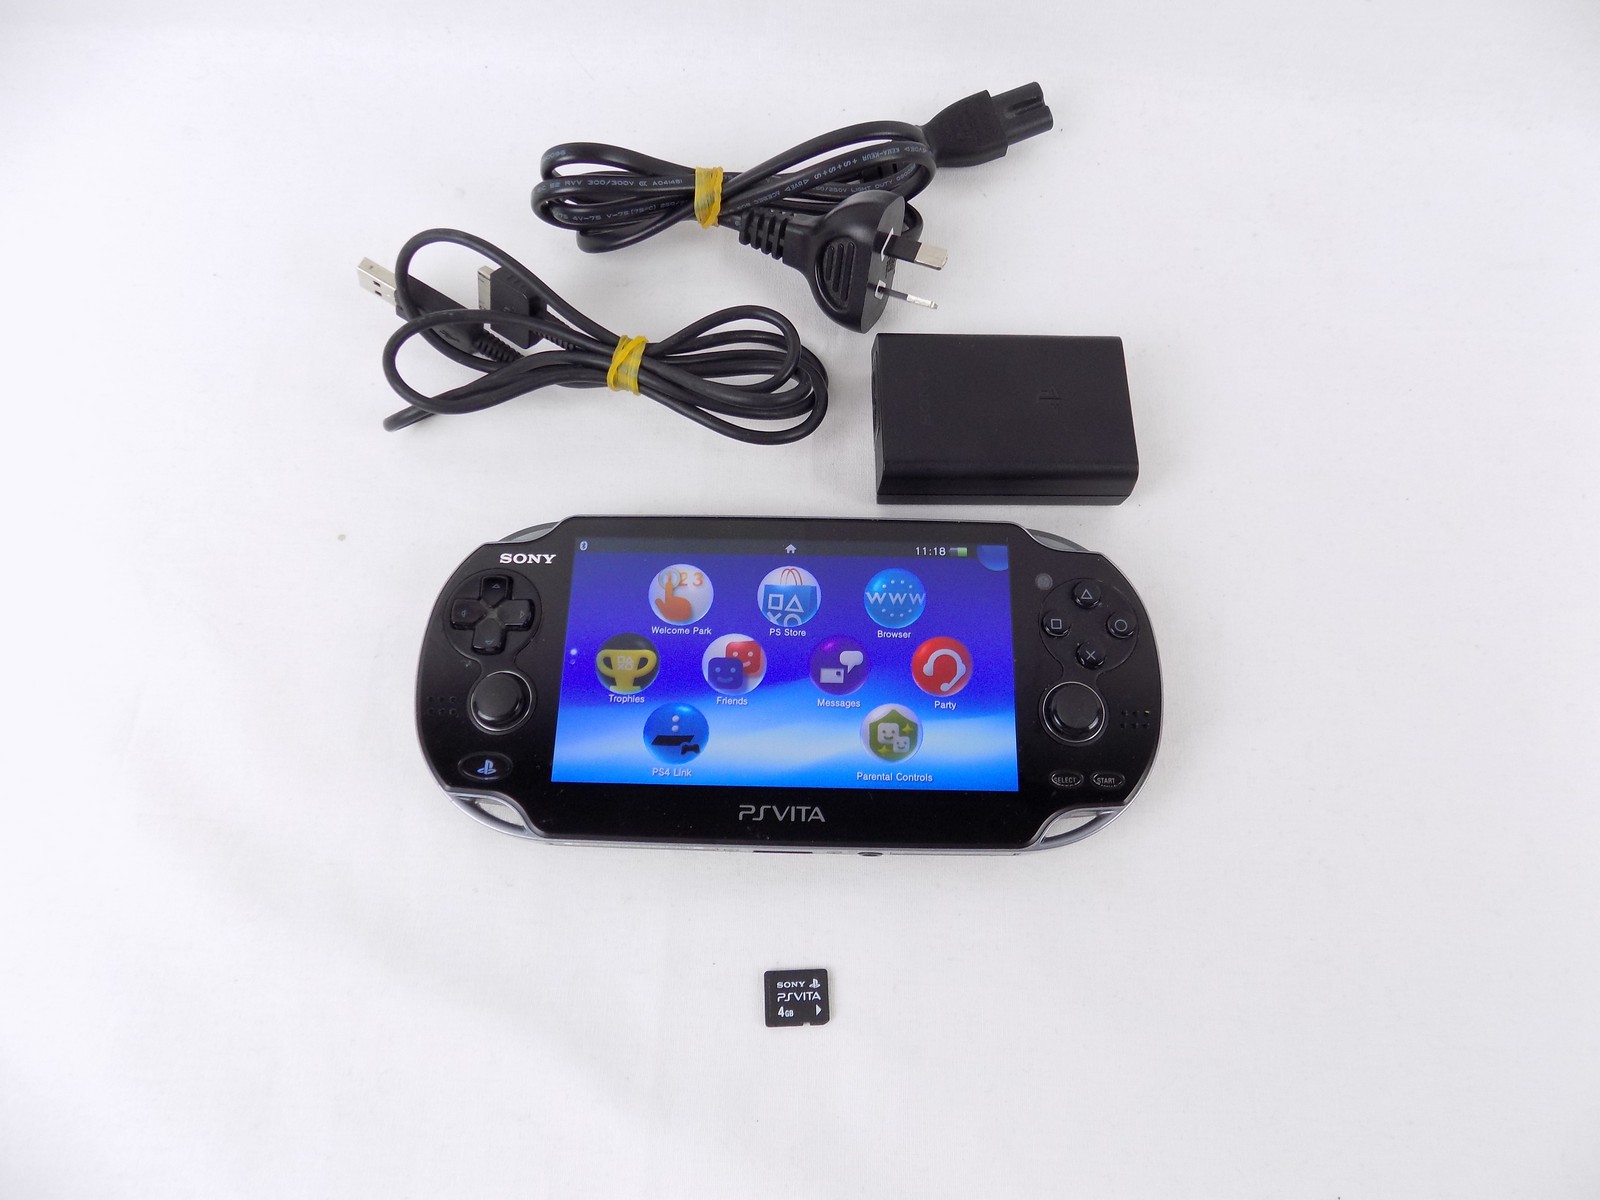 Like New Sony Ps Vita PCH 1000 Oled Console With 4Gb Memory Card + Charger